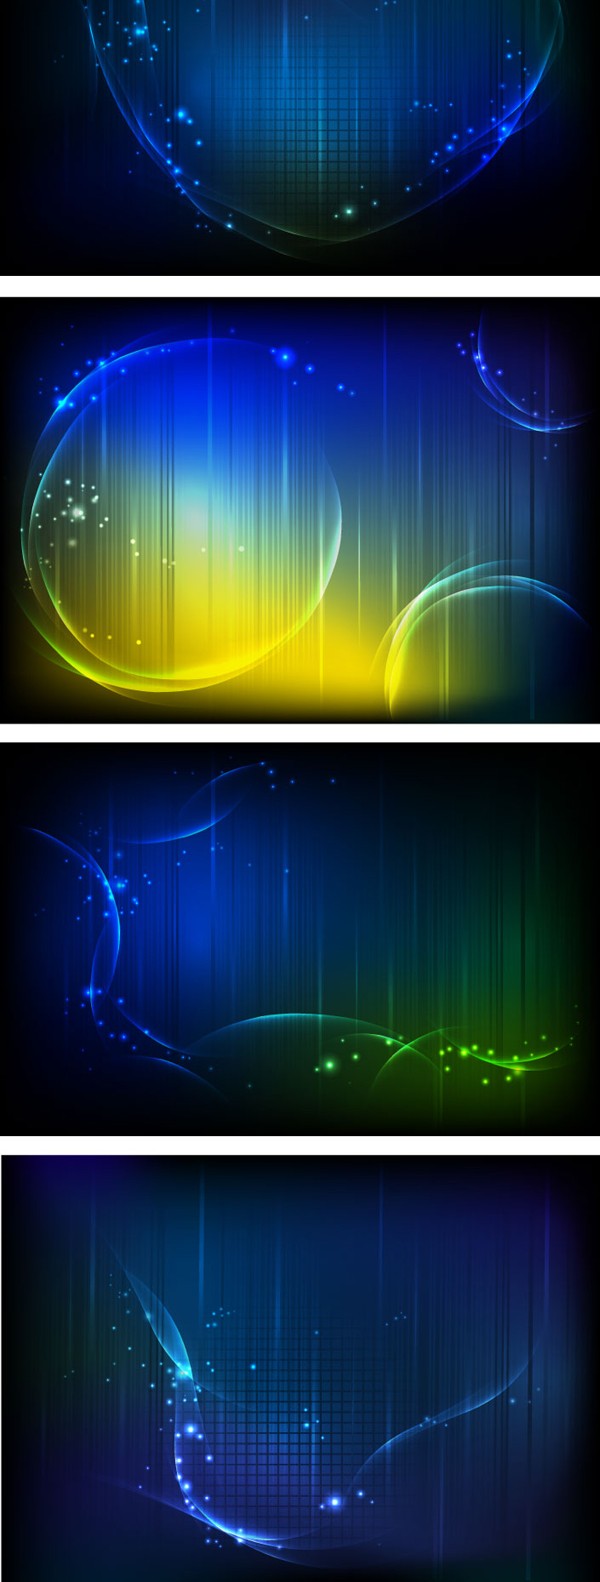 Dream dynamic light background vector graphic